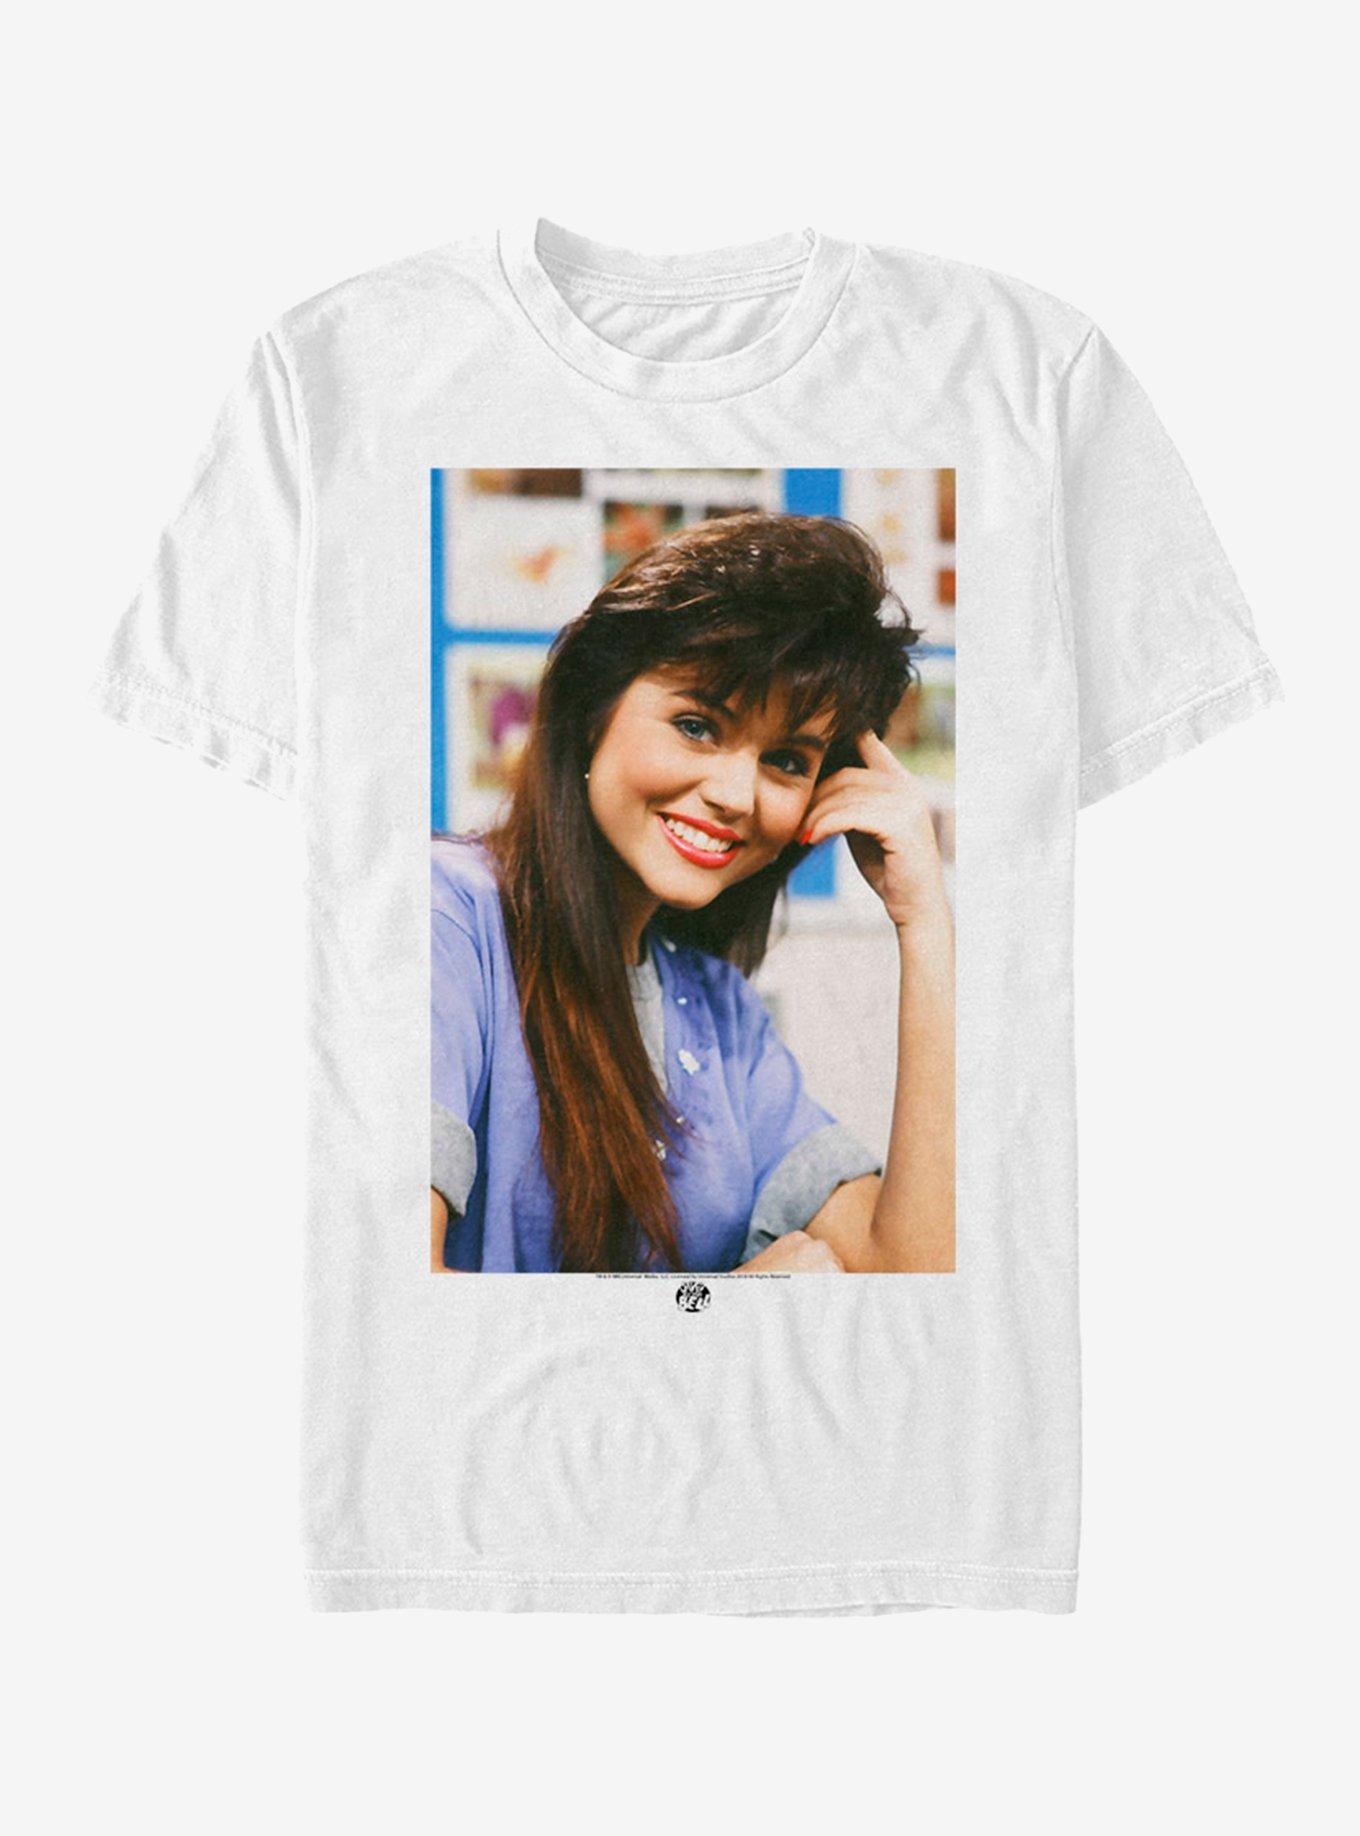 Saved by The Bell Distressed Logo Adult S/S T-Shirt